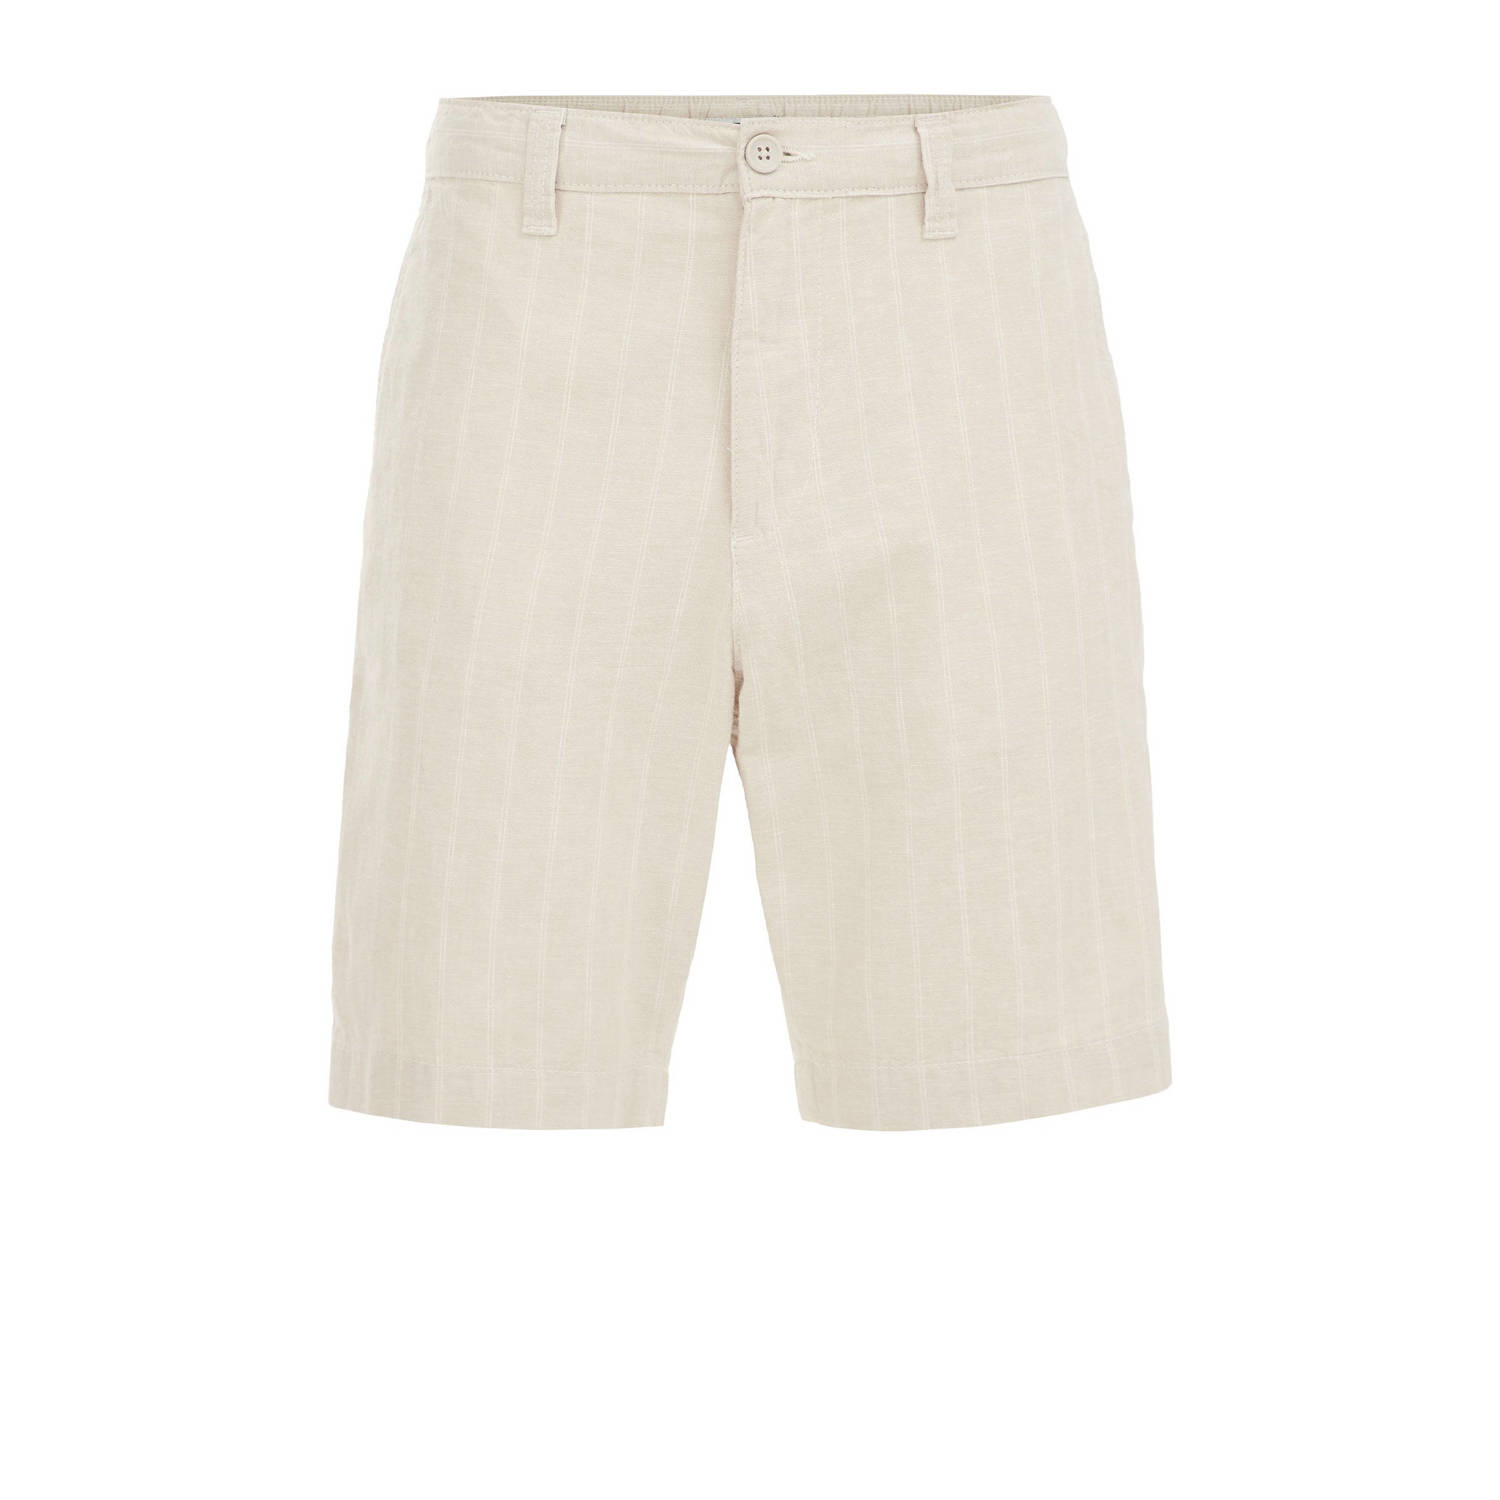 WE Fashion gestreepte relaxed short sand